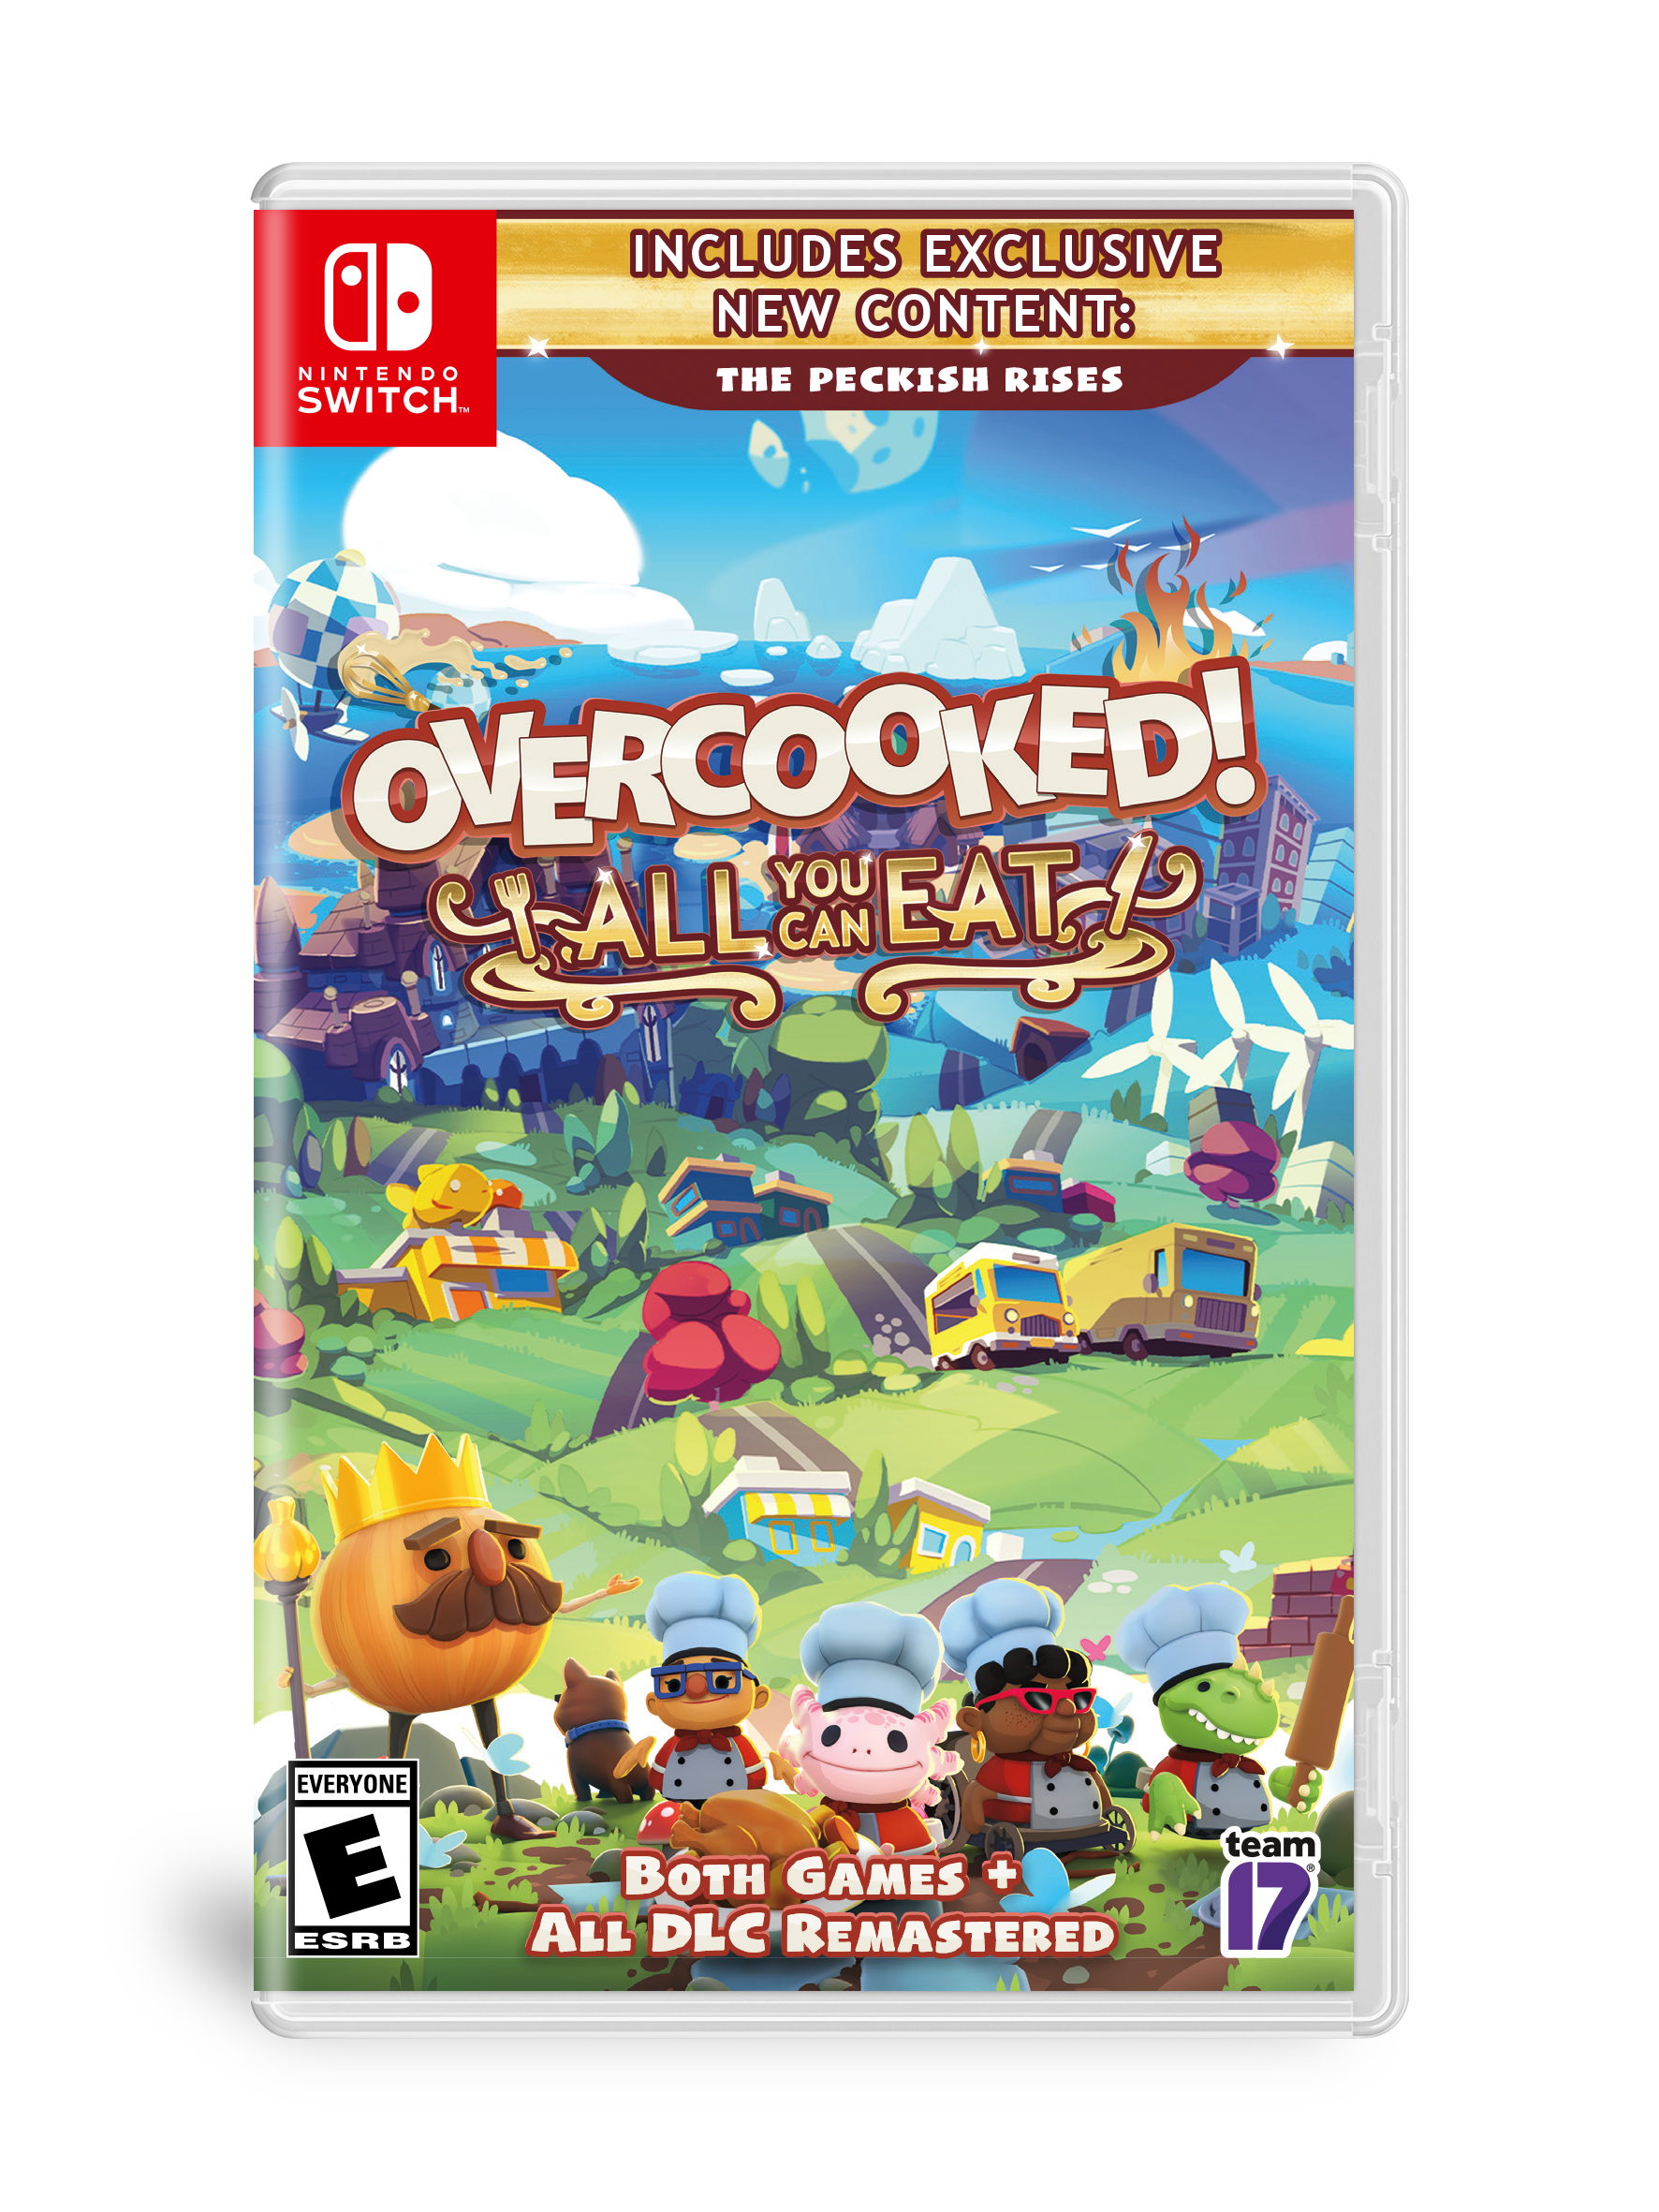 Nintendo Switch Lite Blue with Overcooked! All You Can Eat and Mytrix Accessories NS Game Disc Bundle Best Holiday Gift